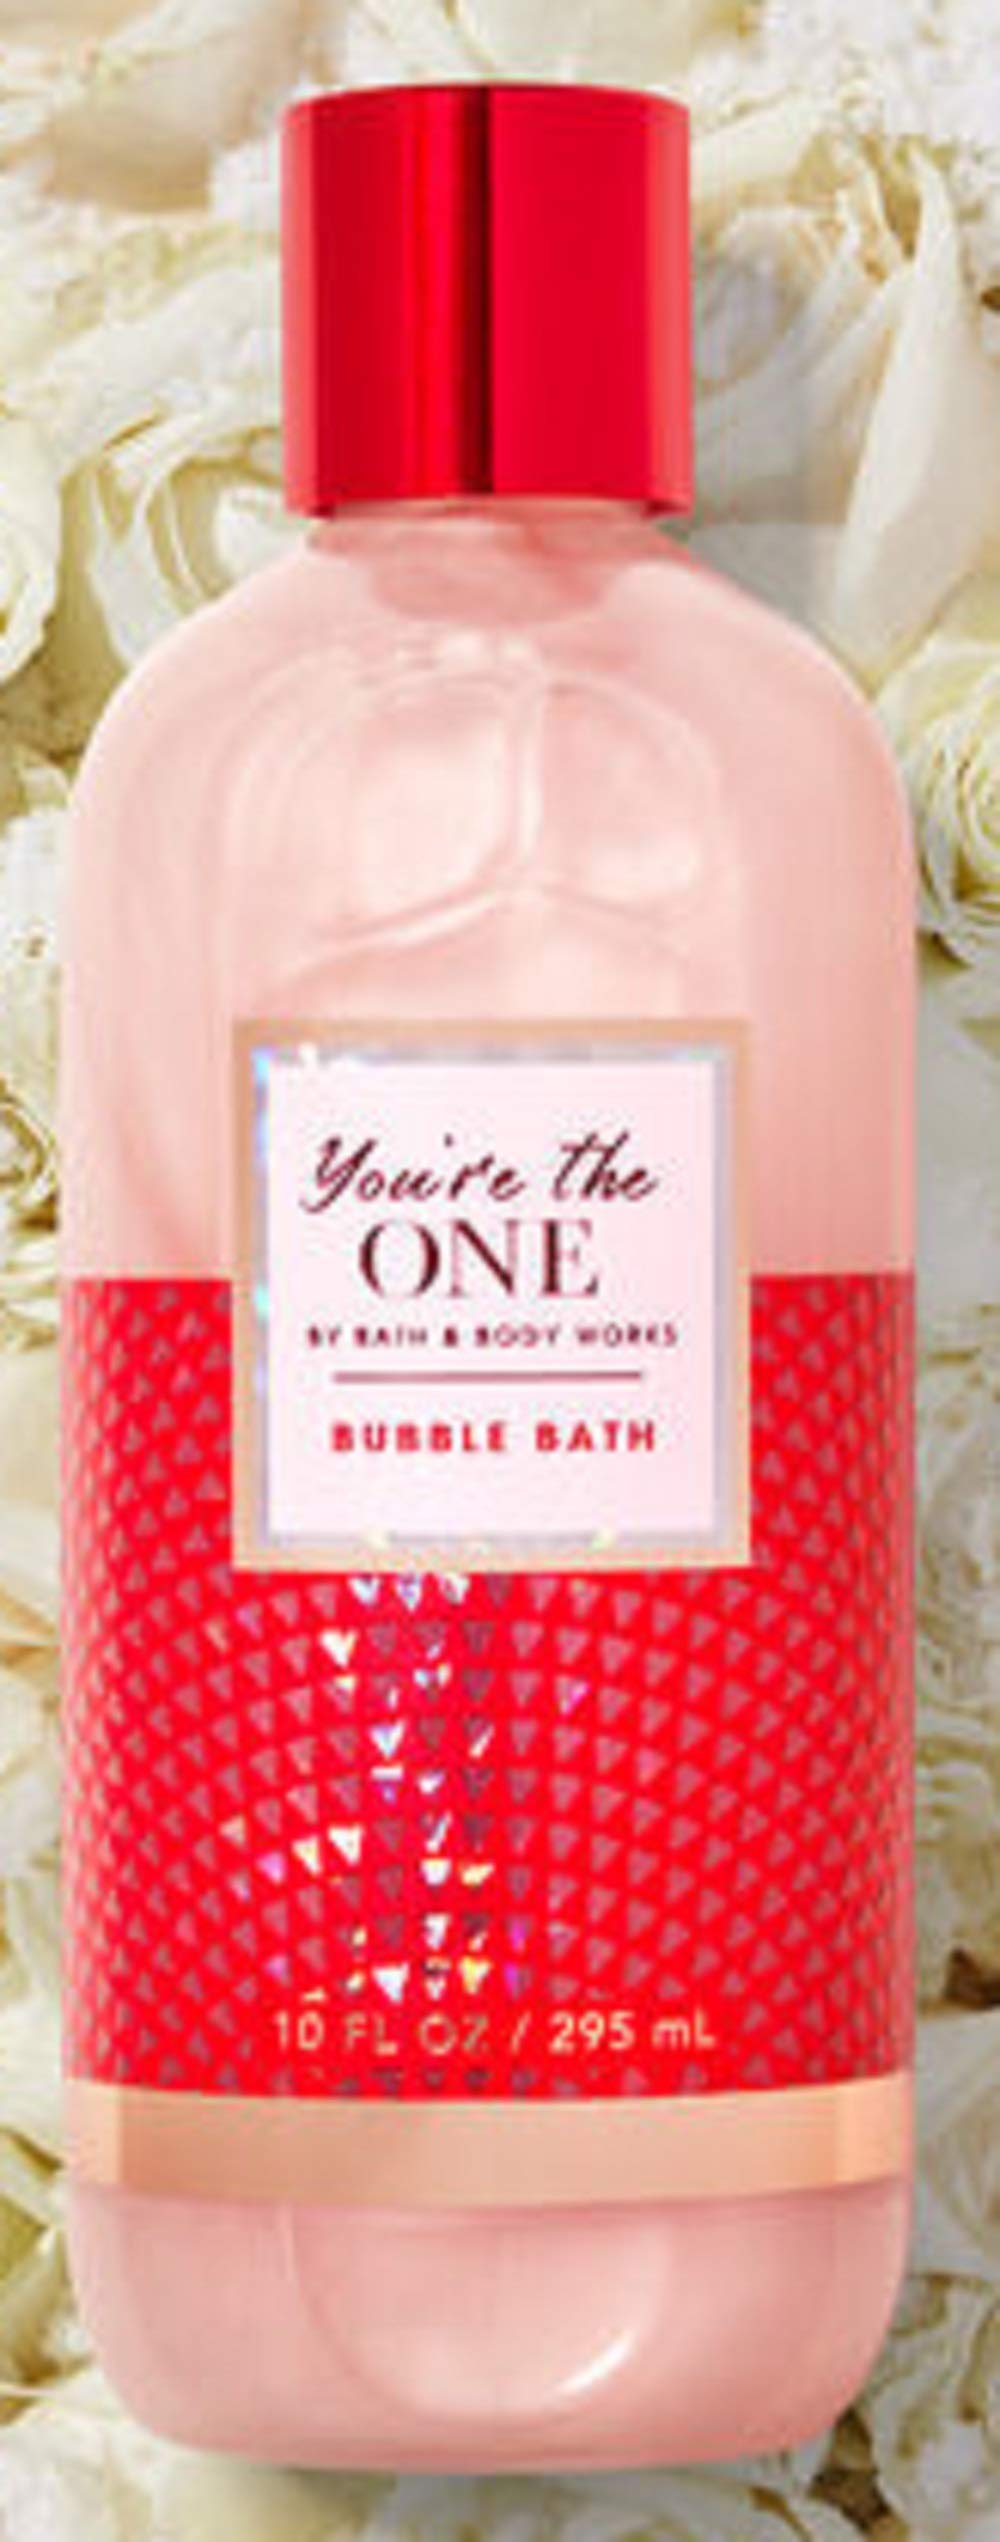 Bath And Body Works Youre The One Bubble Bath 10 Ounce Birch Rose Strawberry 667553704627 Ebay